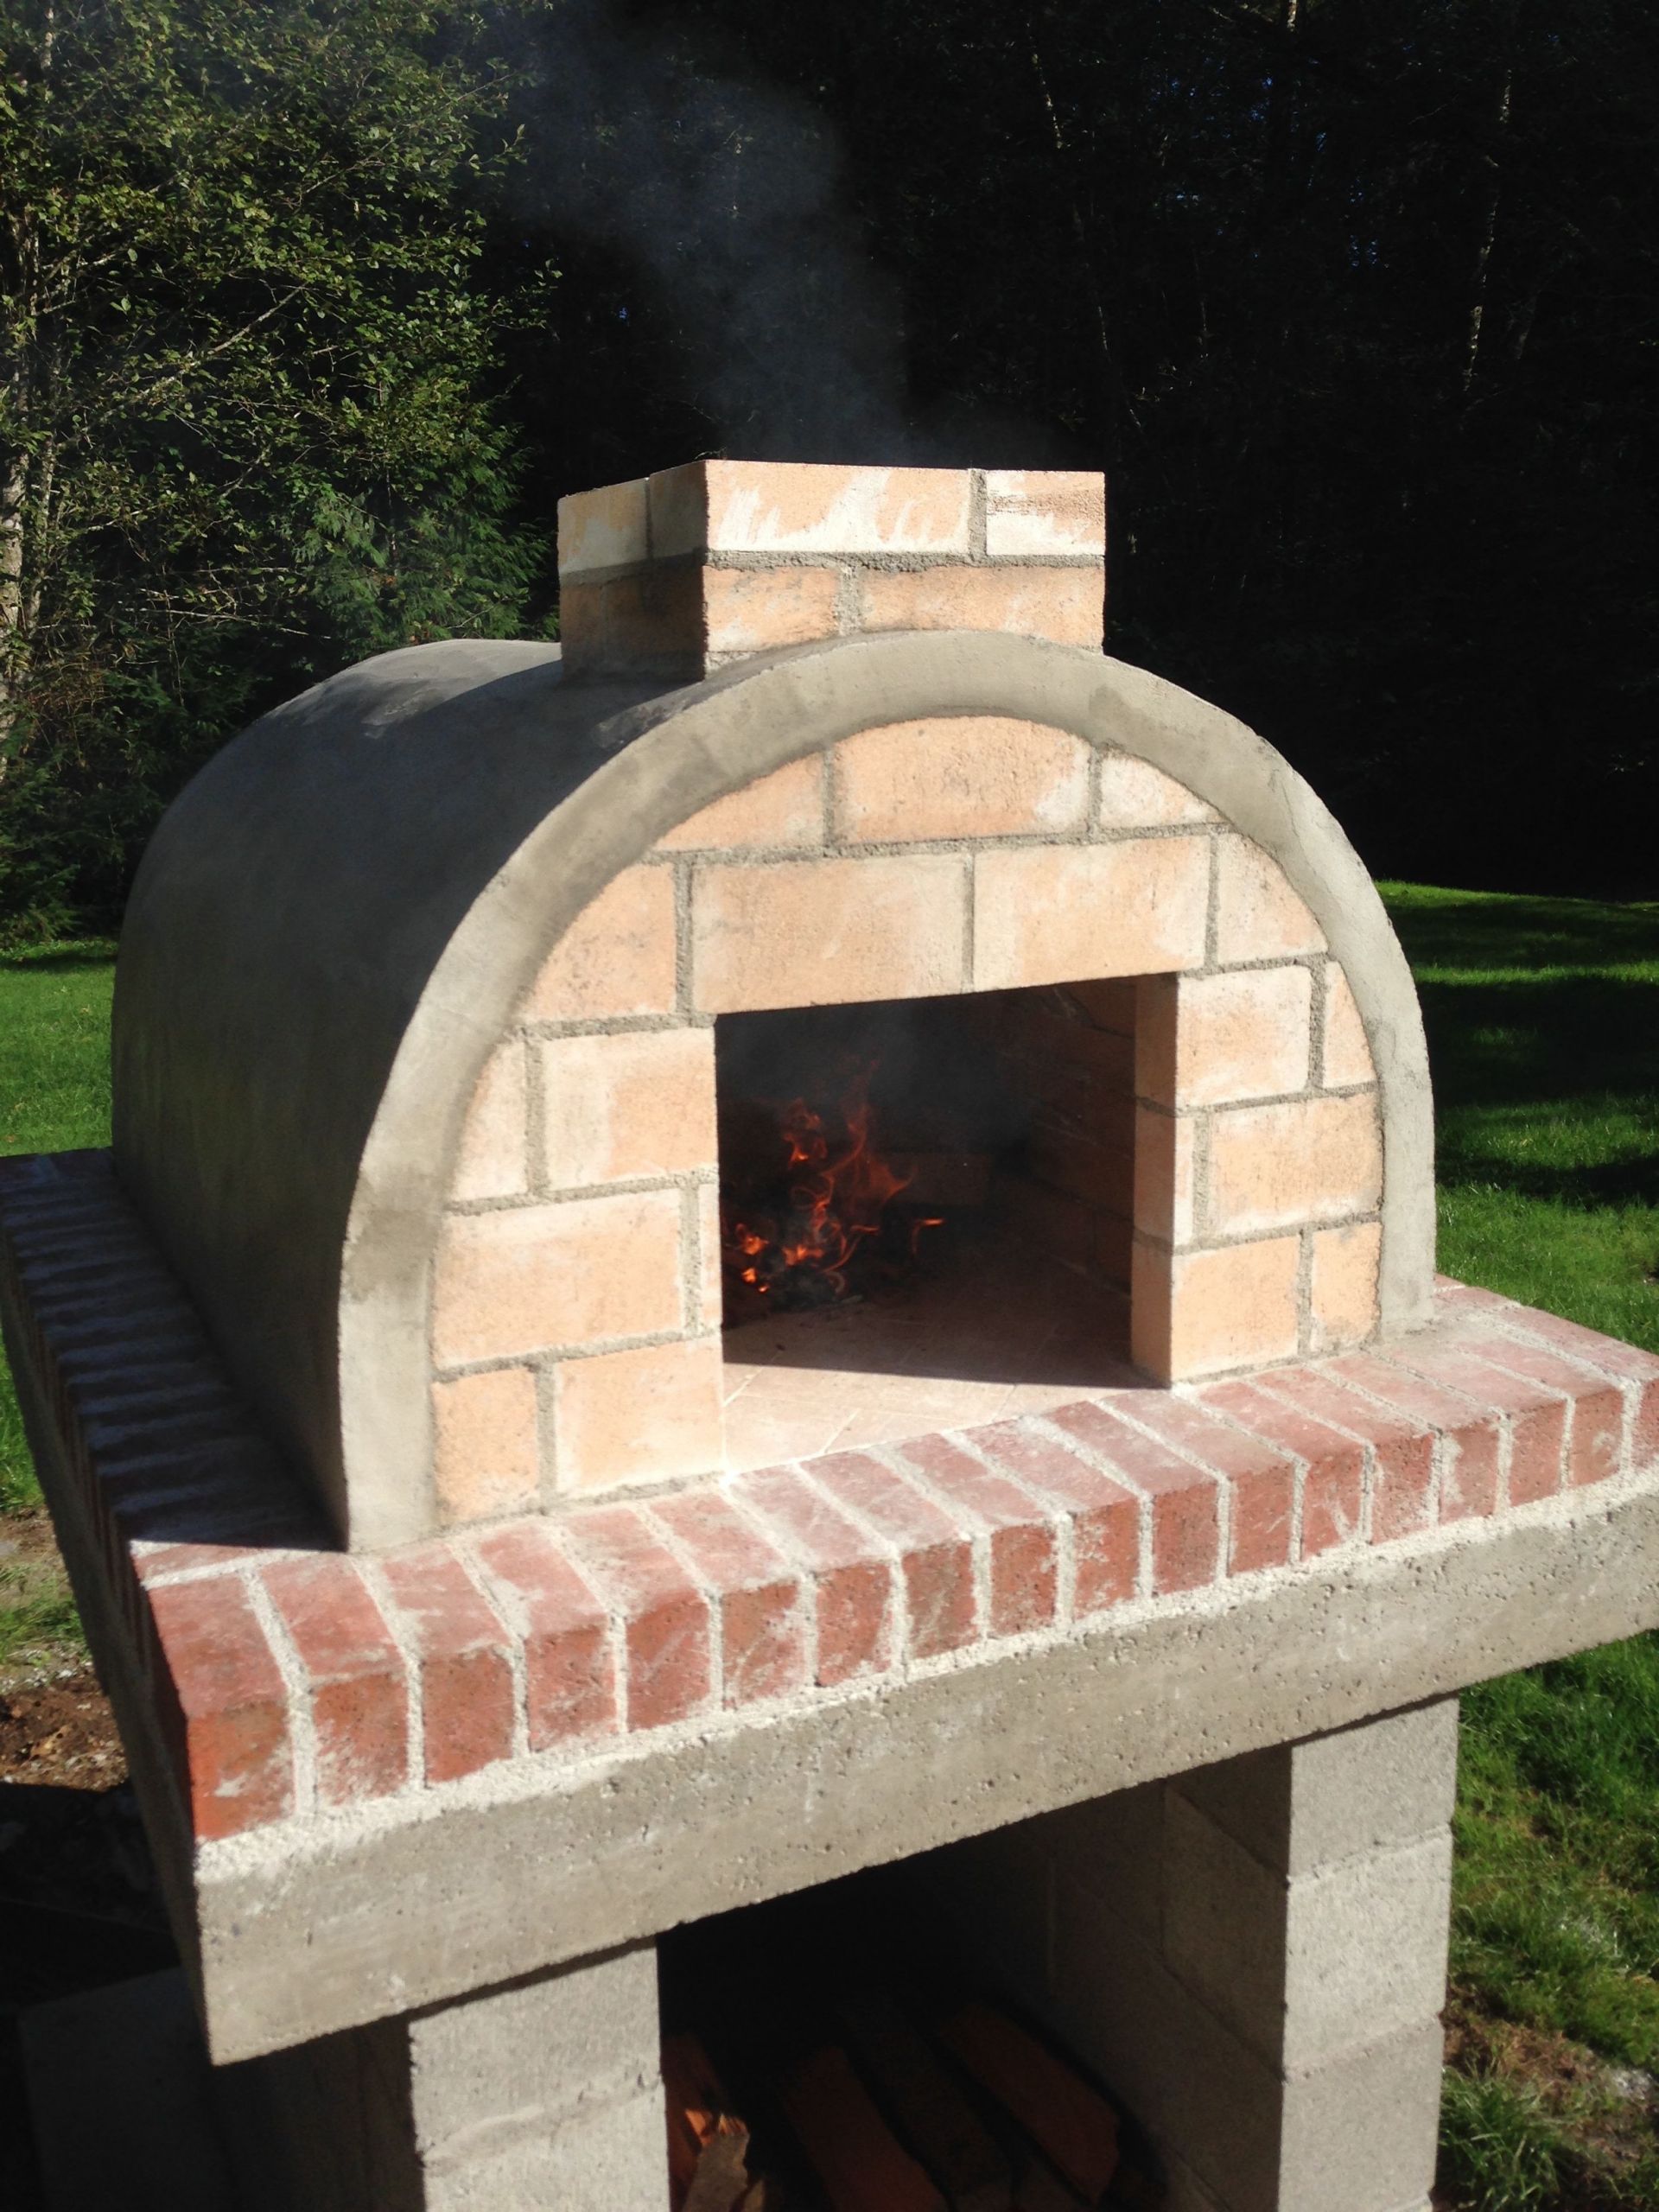 Pizza Oven Kit DIY
 Anderson Family Wood Fired Outdoor DIY Pizza Oven by